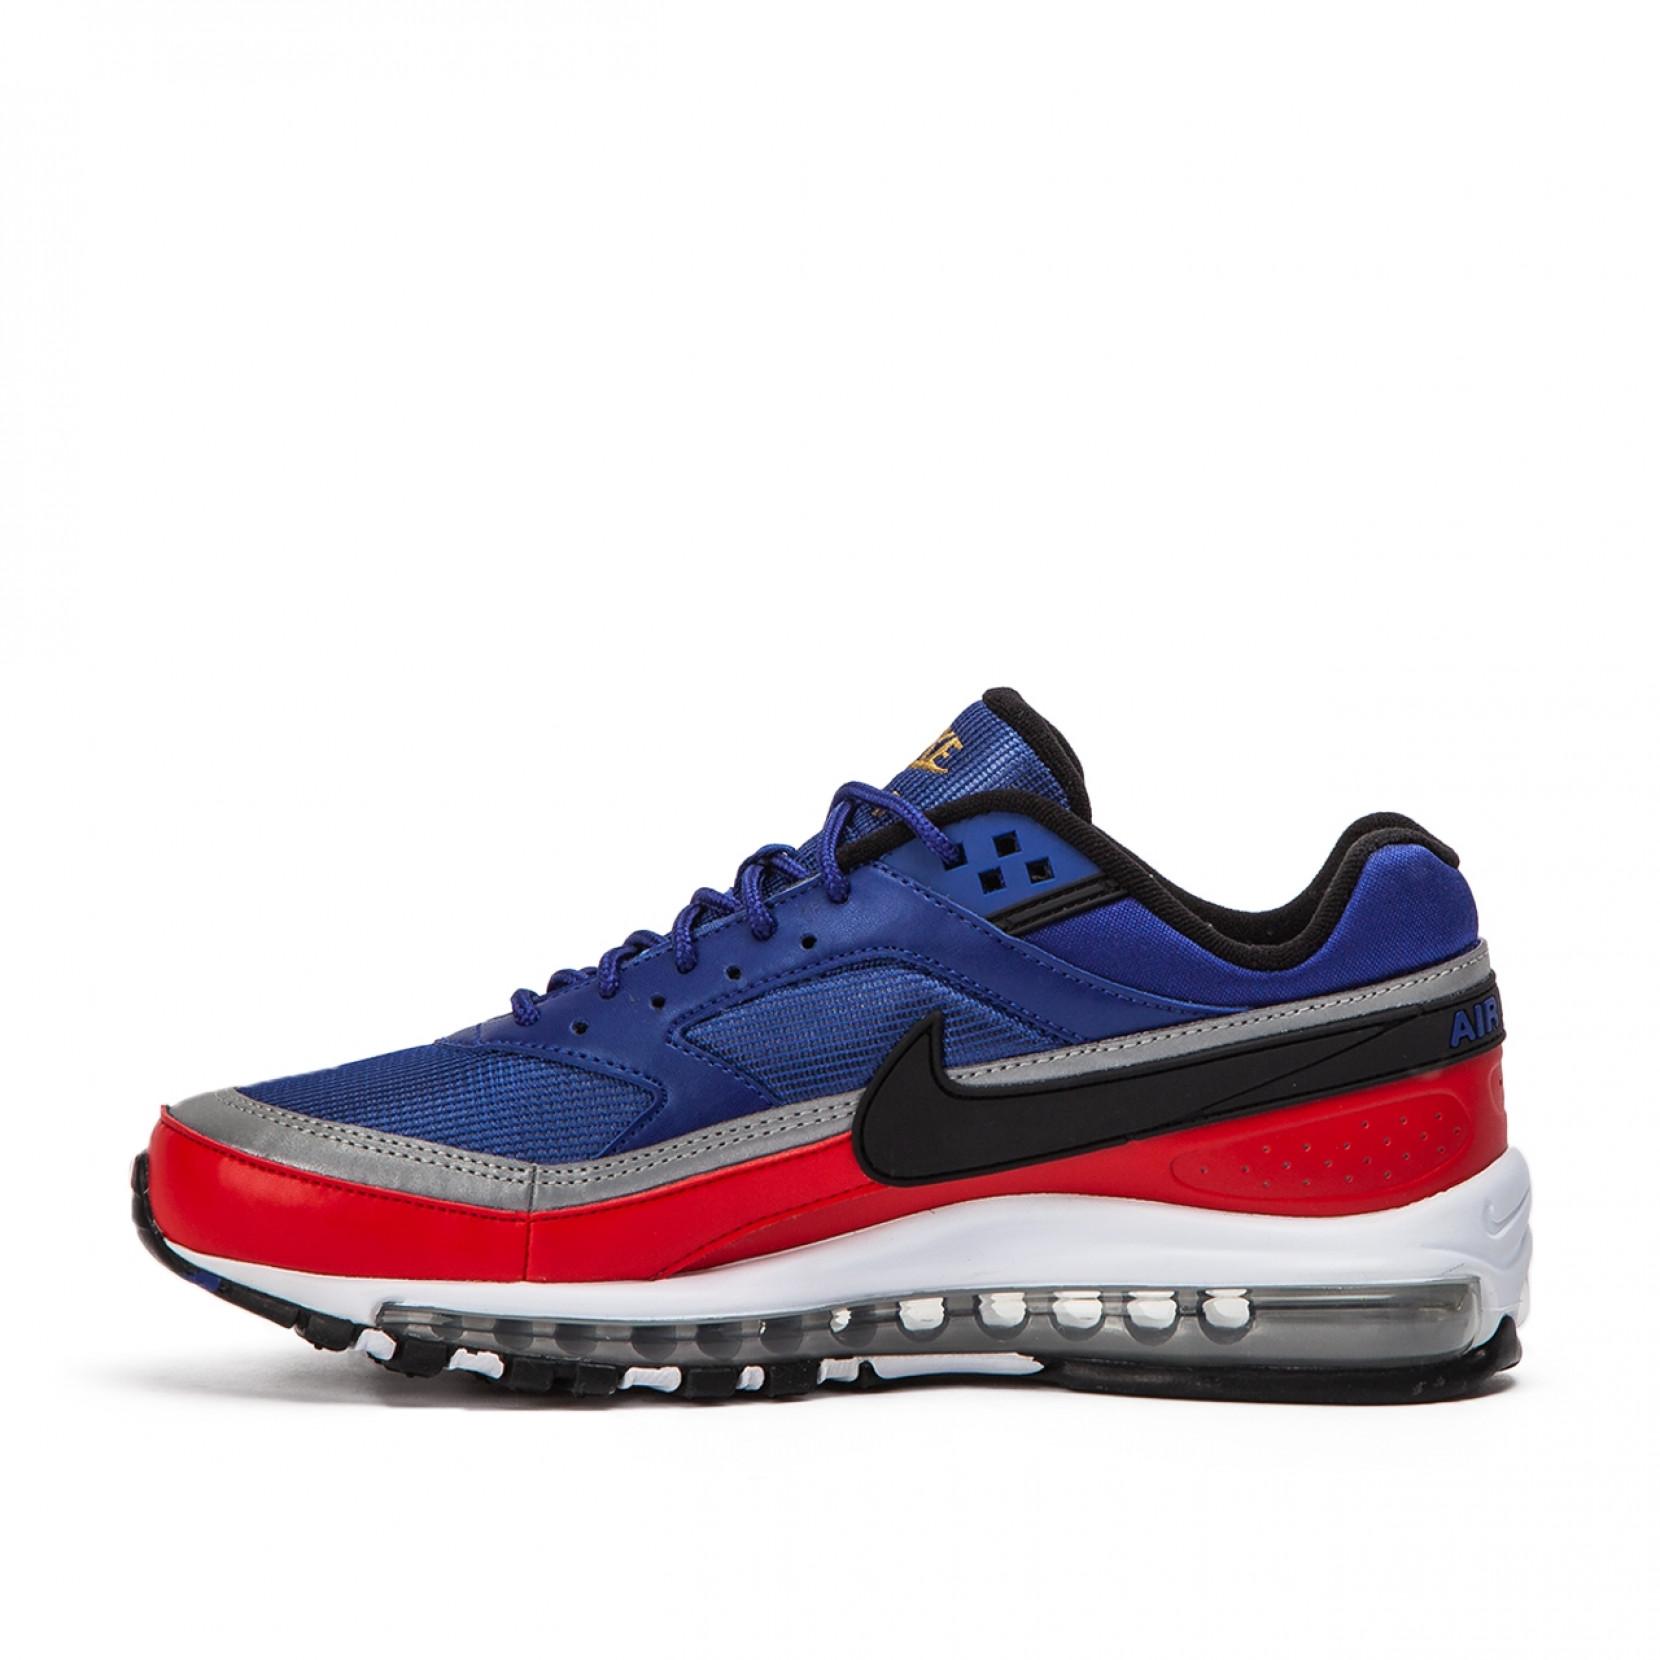 Nike Rubber Air Max 97 Bw in Blue for Men - Lyst